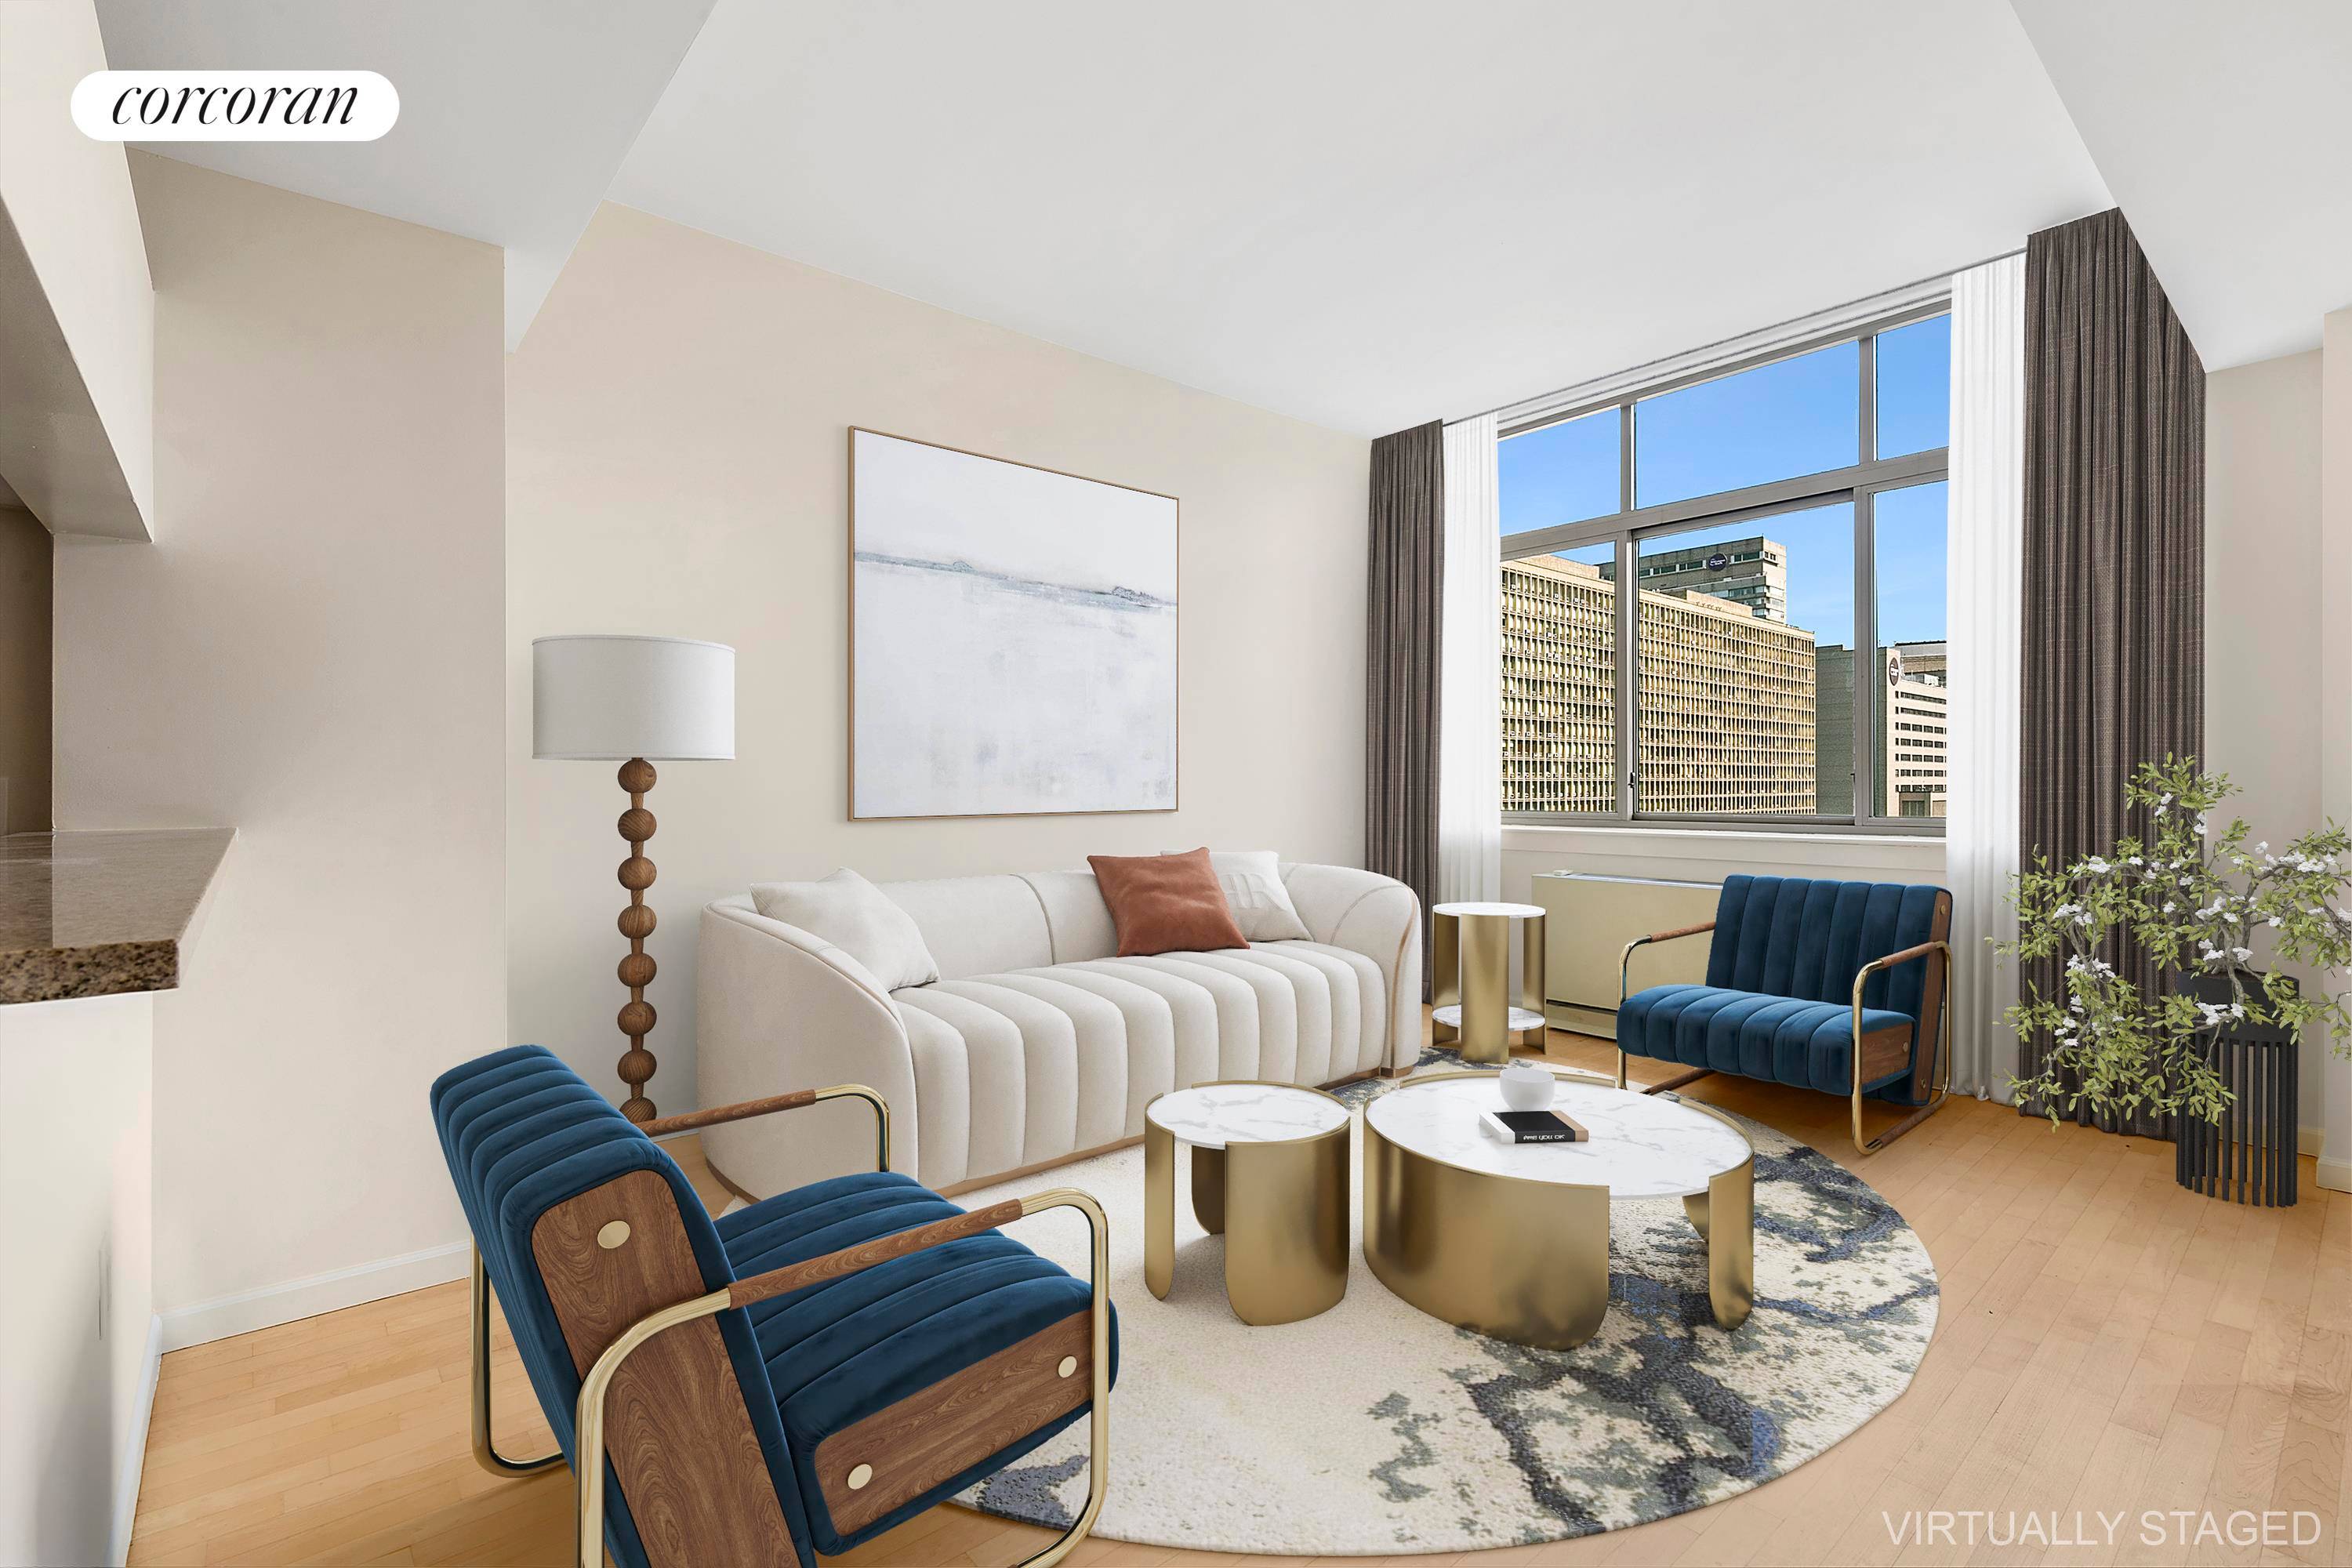 From the moment you walk into this sunny and bright, move in ready one bedroom one bath condo you are met with an abundance of light through walls of oversized ...